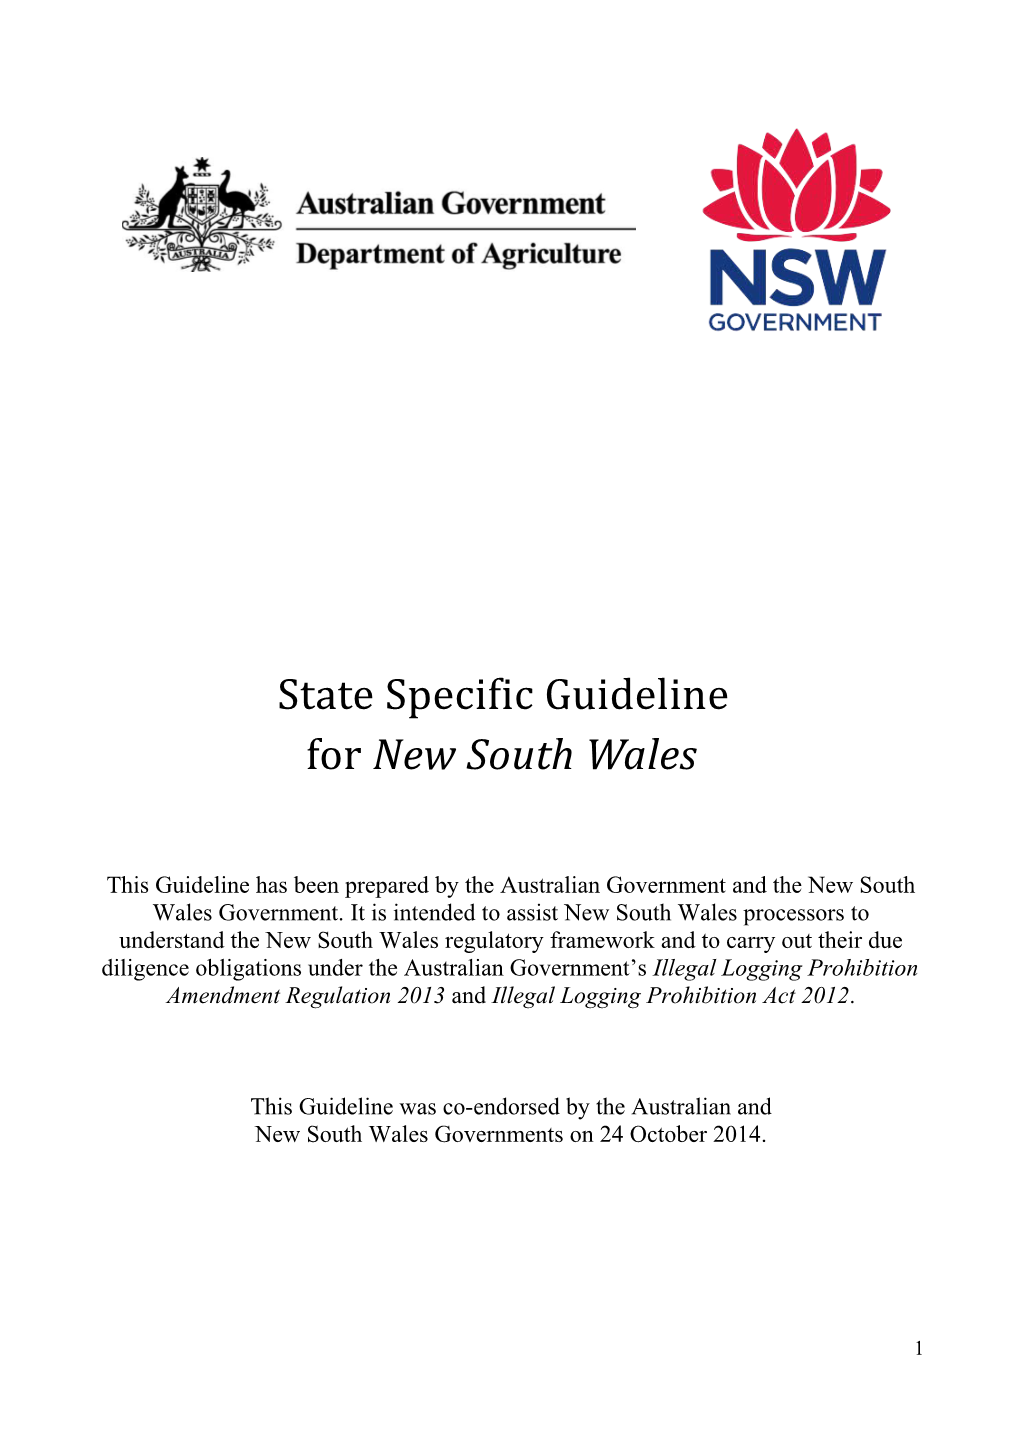 State Specific Guideline for New South Wales